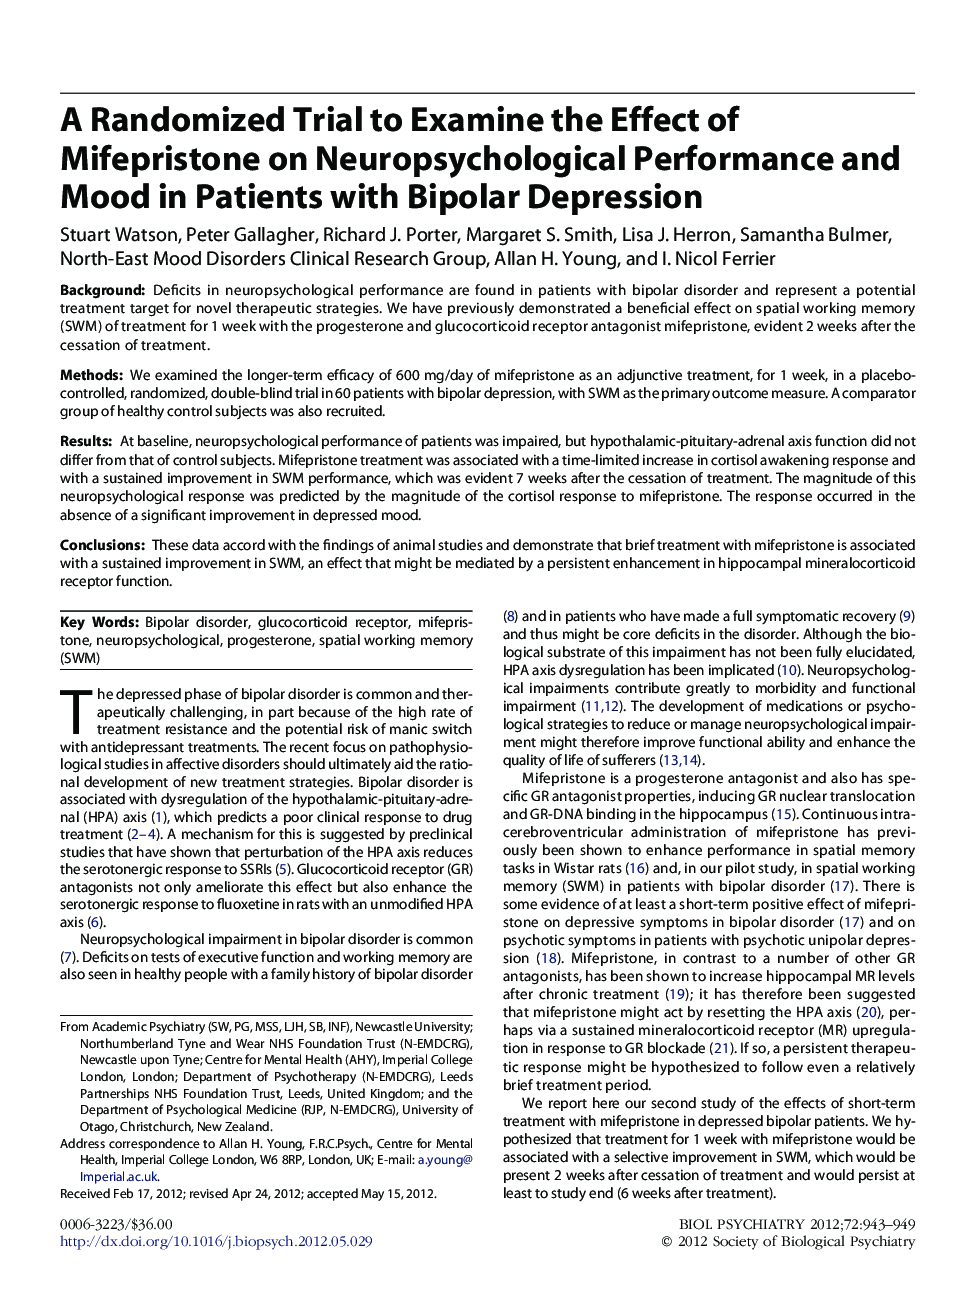 A Randomized Trial to Examine the Effect of Mifepristone on Neuropsychological Performance and Mood in Patients with Bipolar Depression